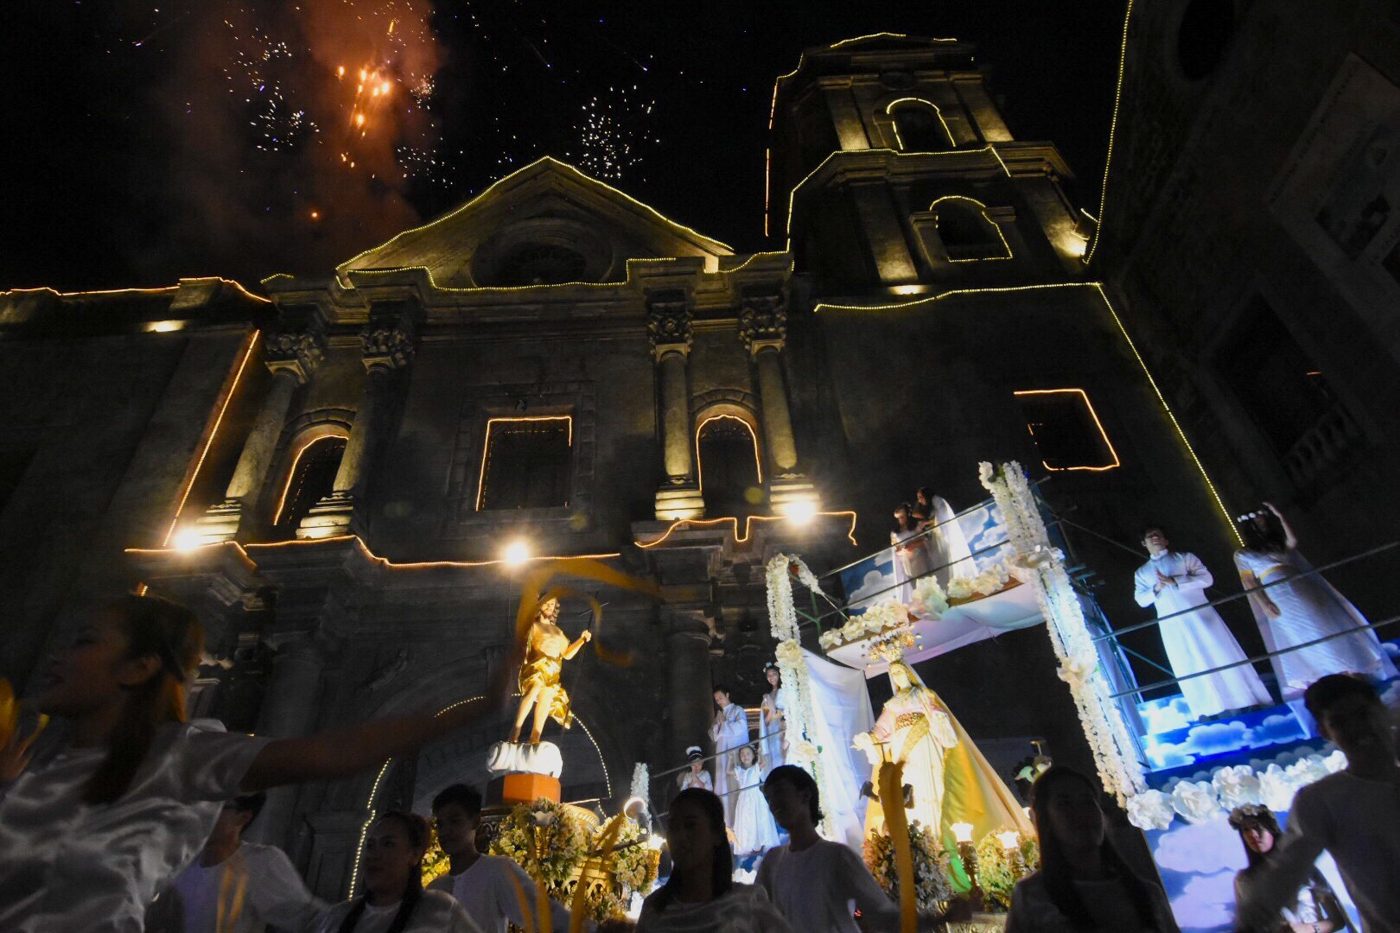 'SALUBONG'. Catholics at San Agustin Church in Intramuros, Manila, on April 1, 2018, observe the traditional 'Salubong' ritual, which ends with the risen Jesus and Mary 'meeting' on Easter. Photo by Angie de Silva/Rappler   